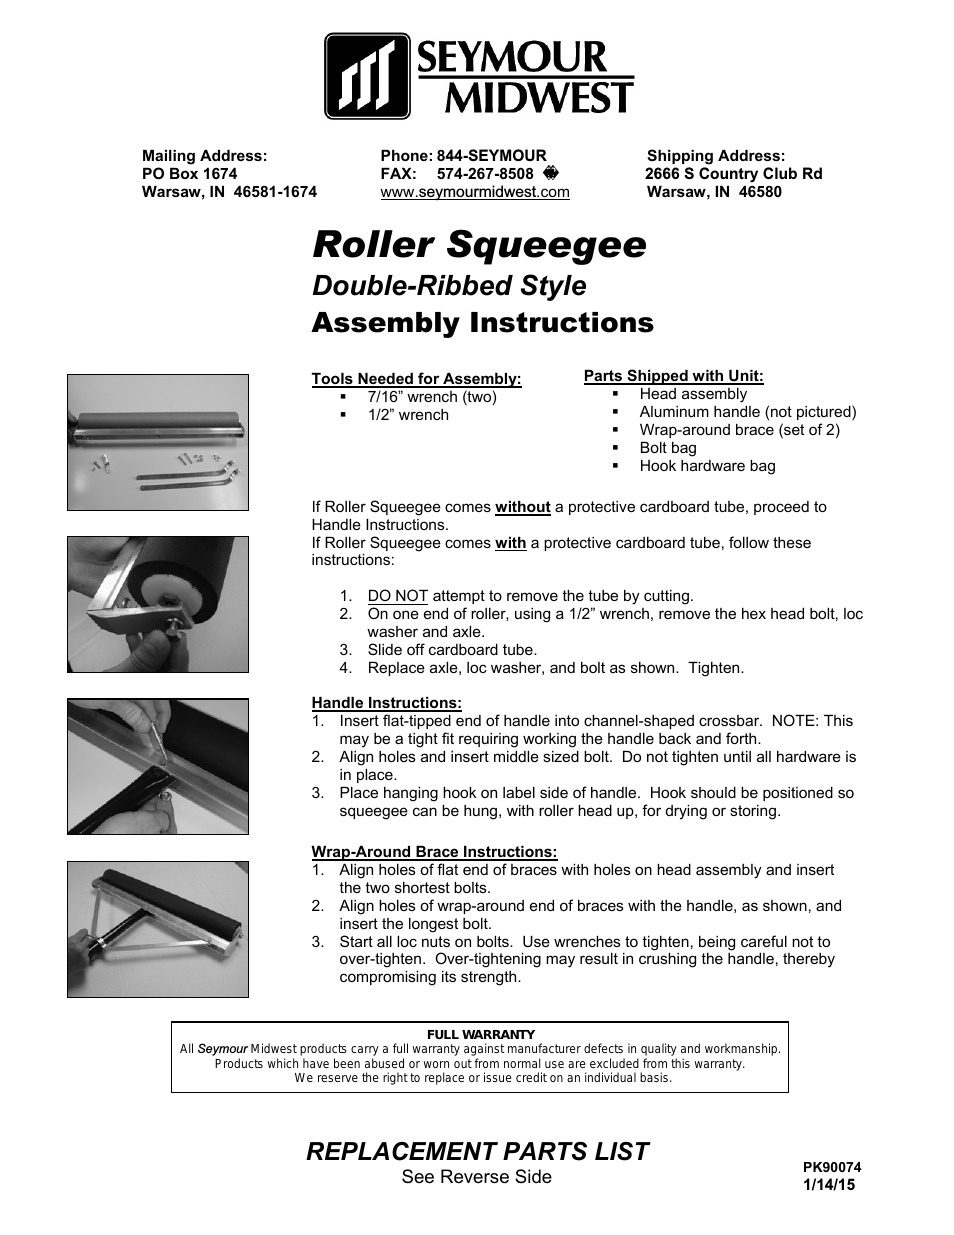 Roller Squeegee, Double Ribbed(PK90074)